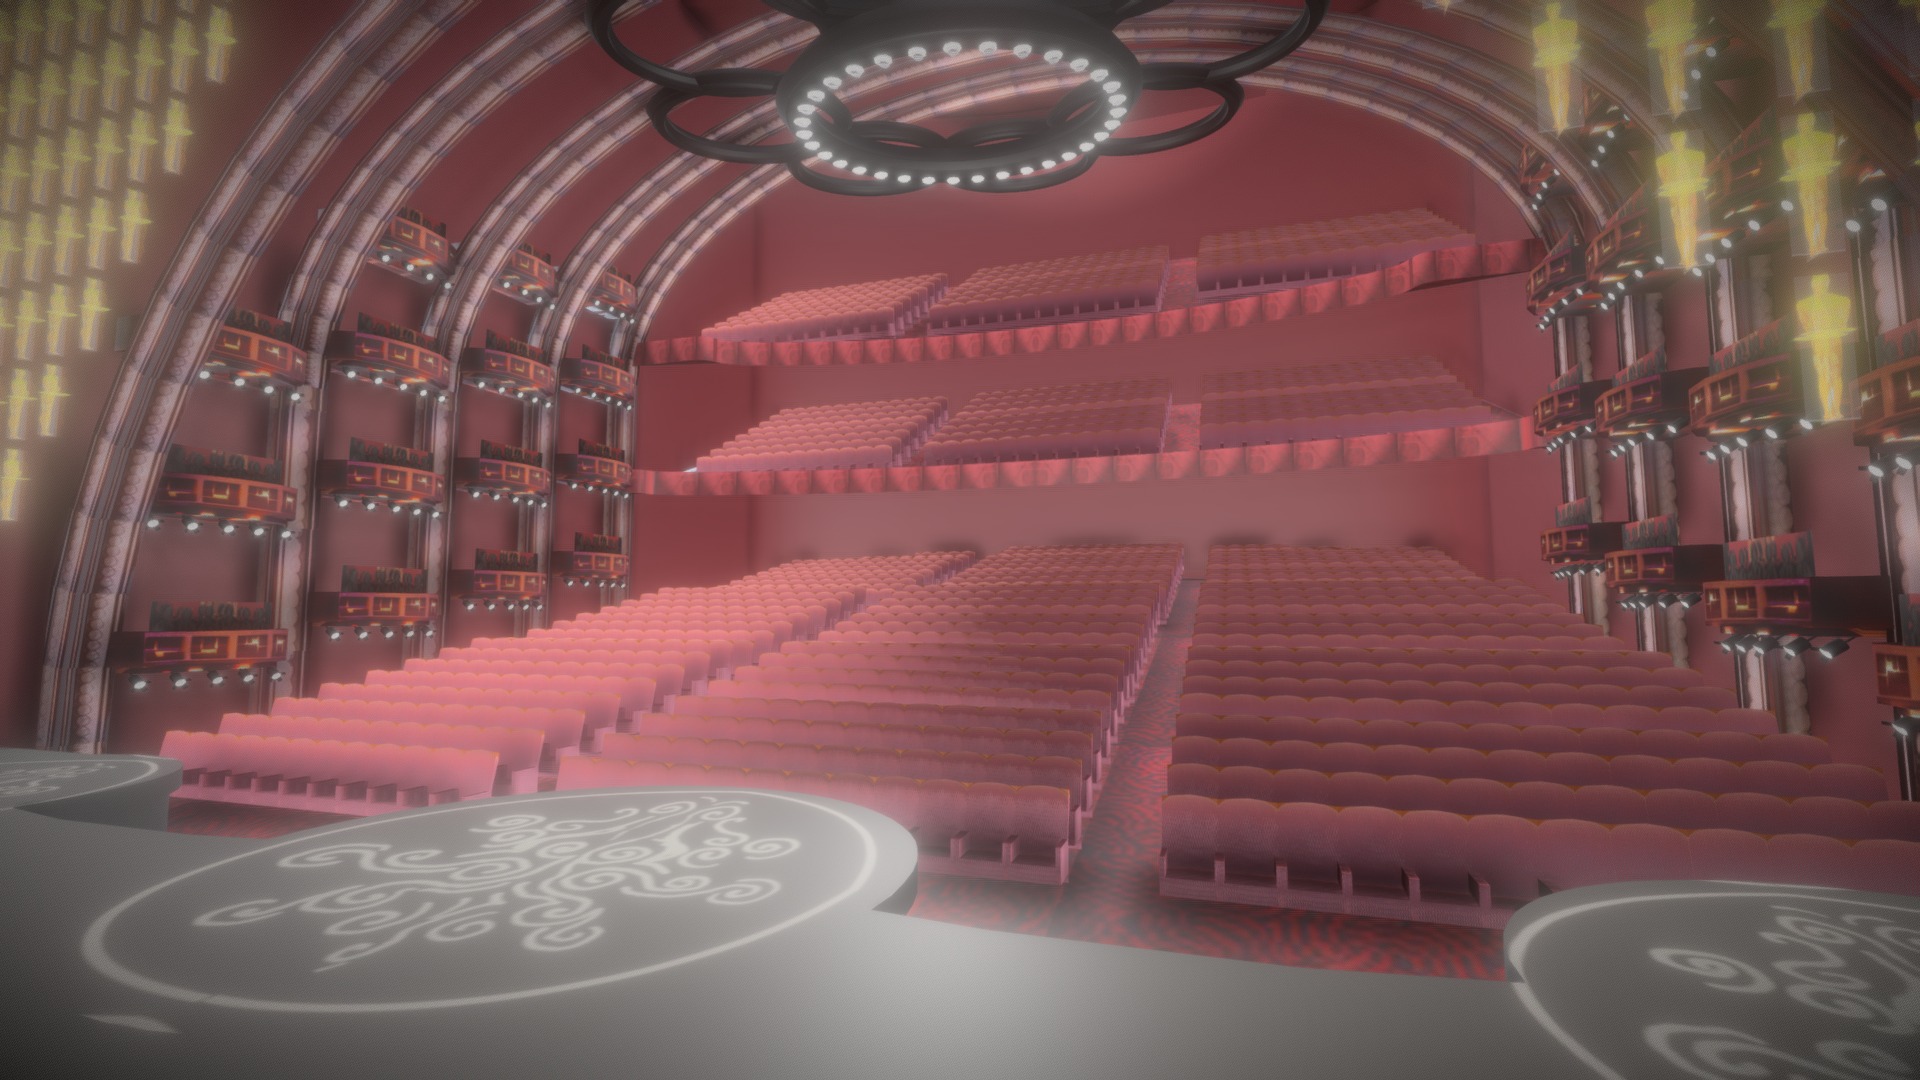 A low-poly version of the famous academy awards theater 3d model